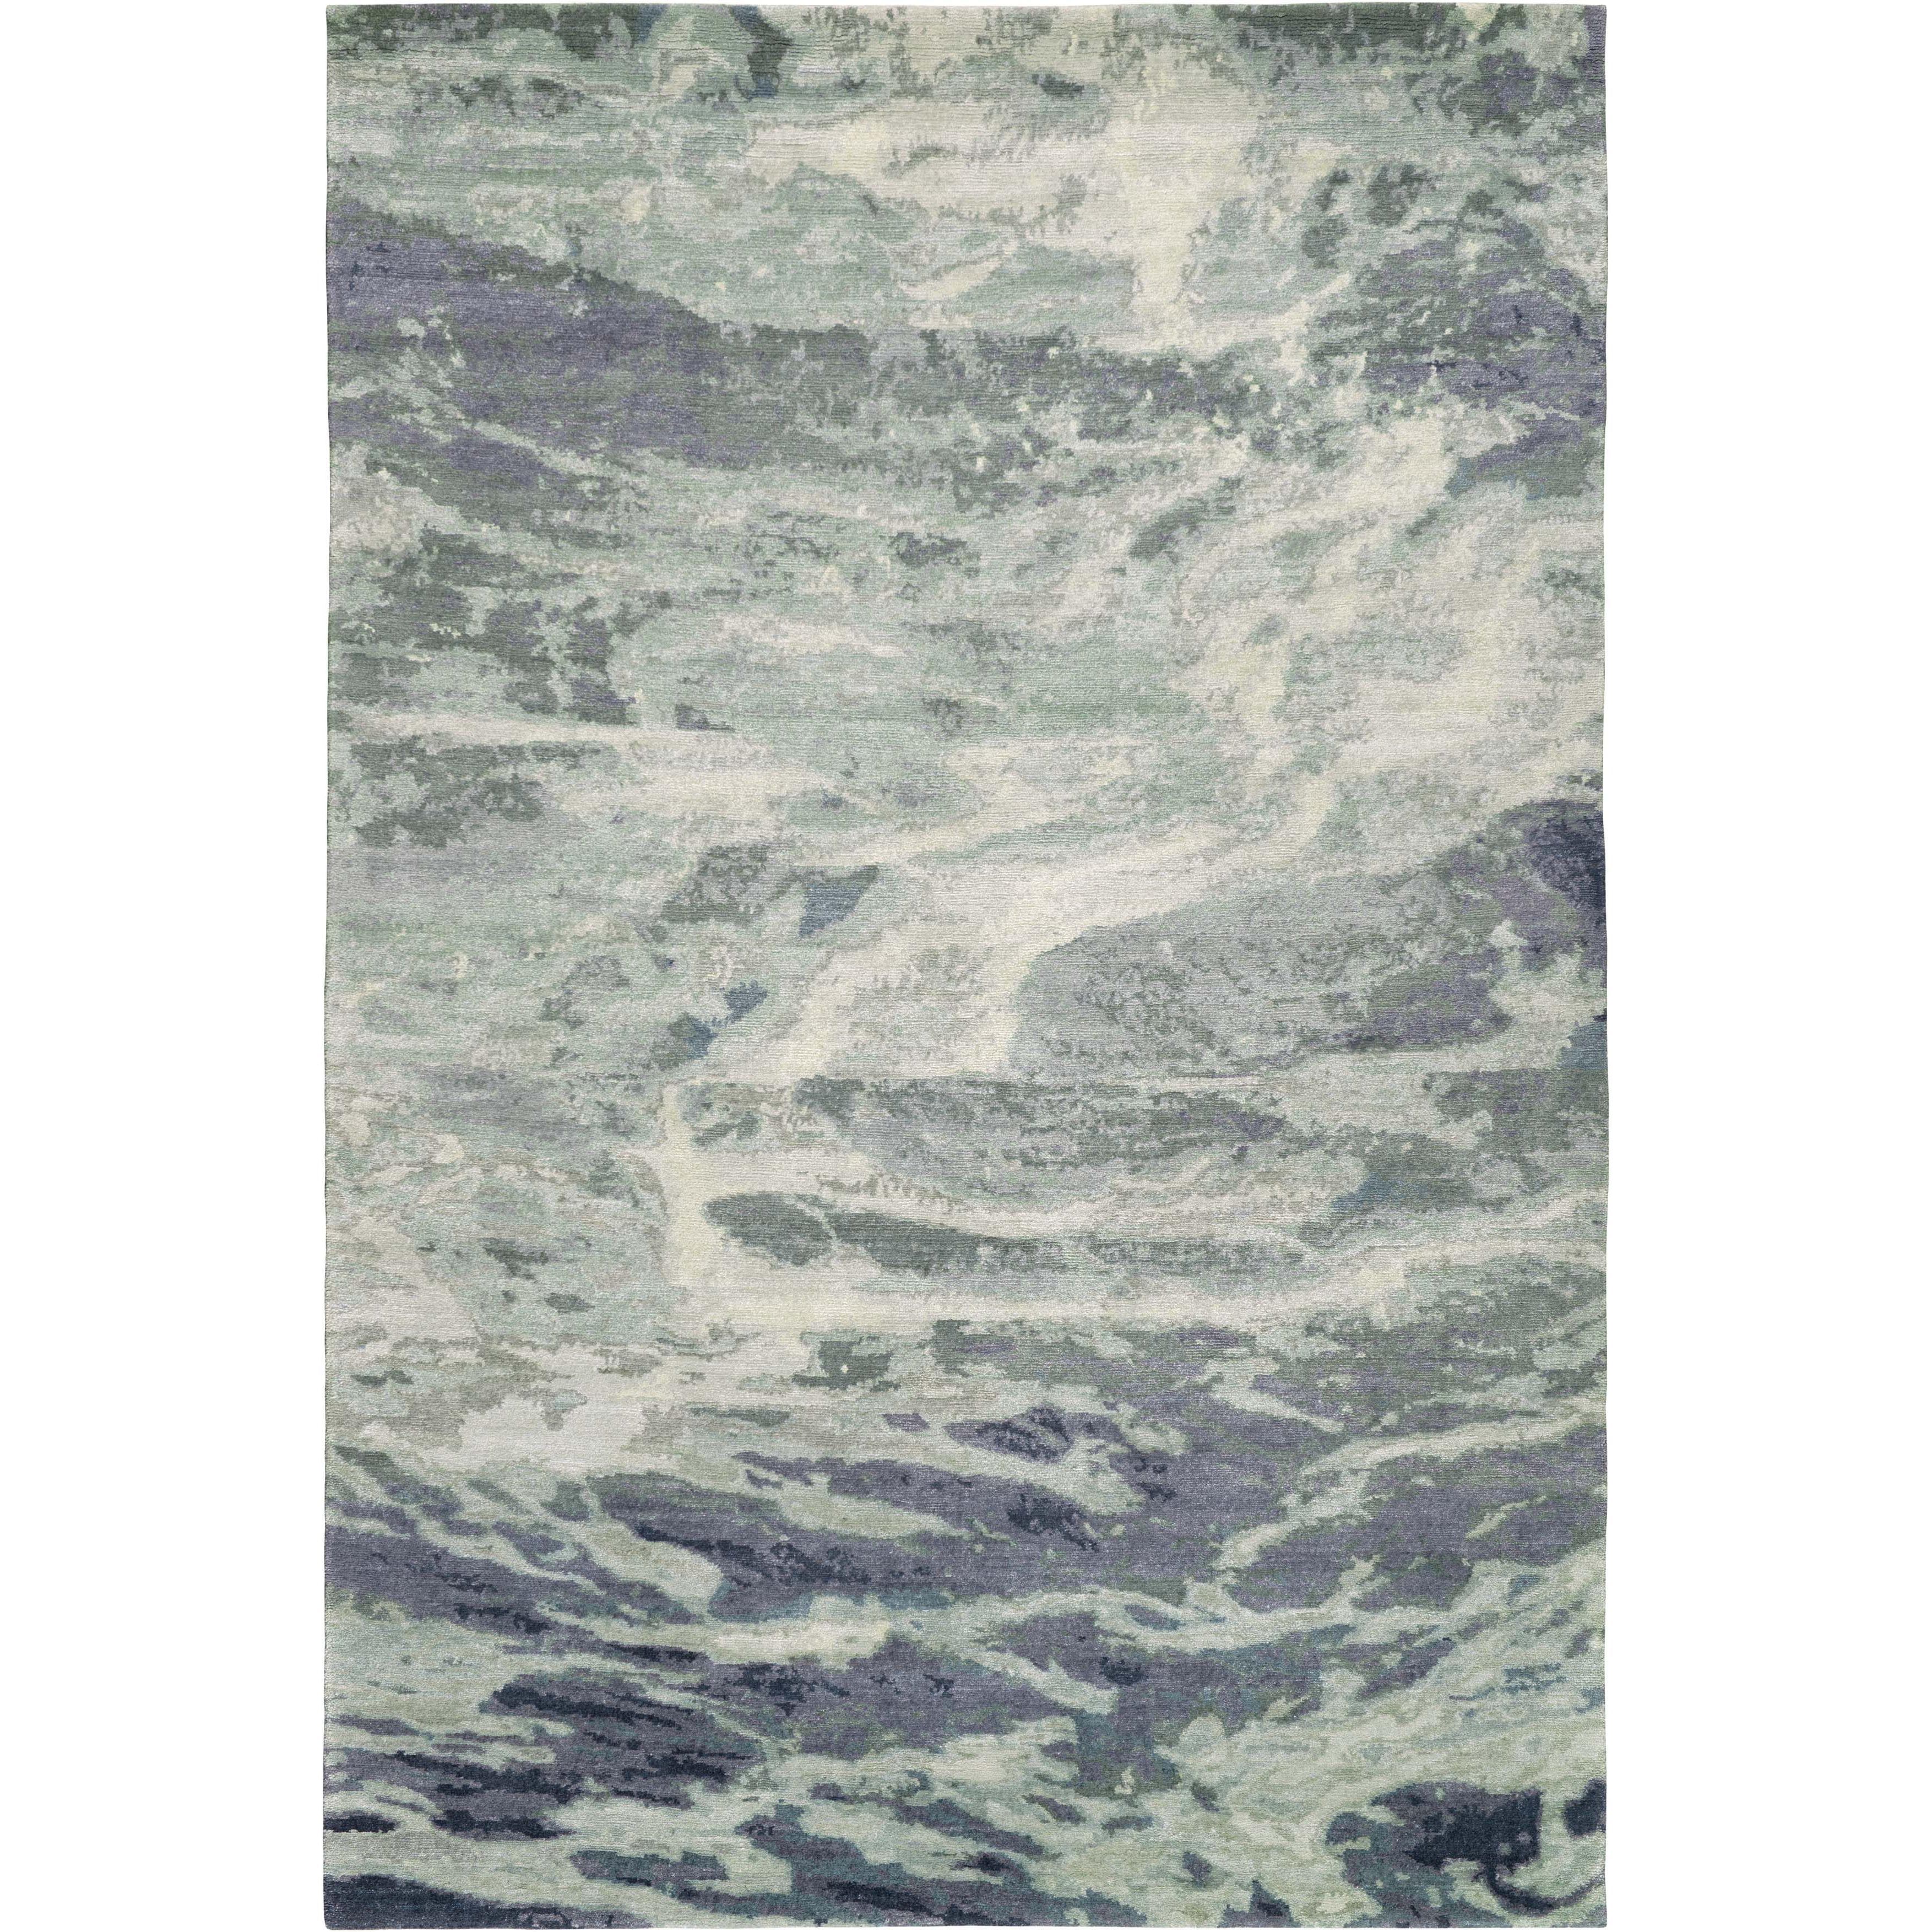 Oceanic Handcrafted 10x8 Rug in Wool by The Rug Company For Sale